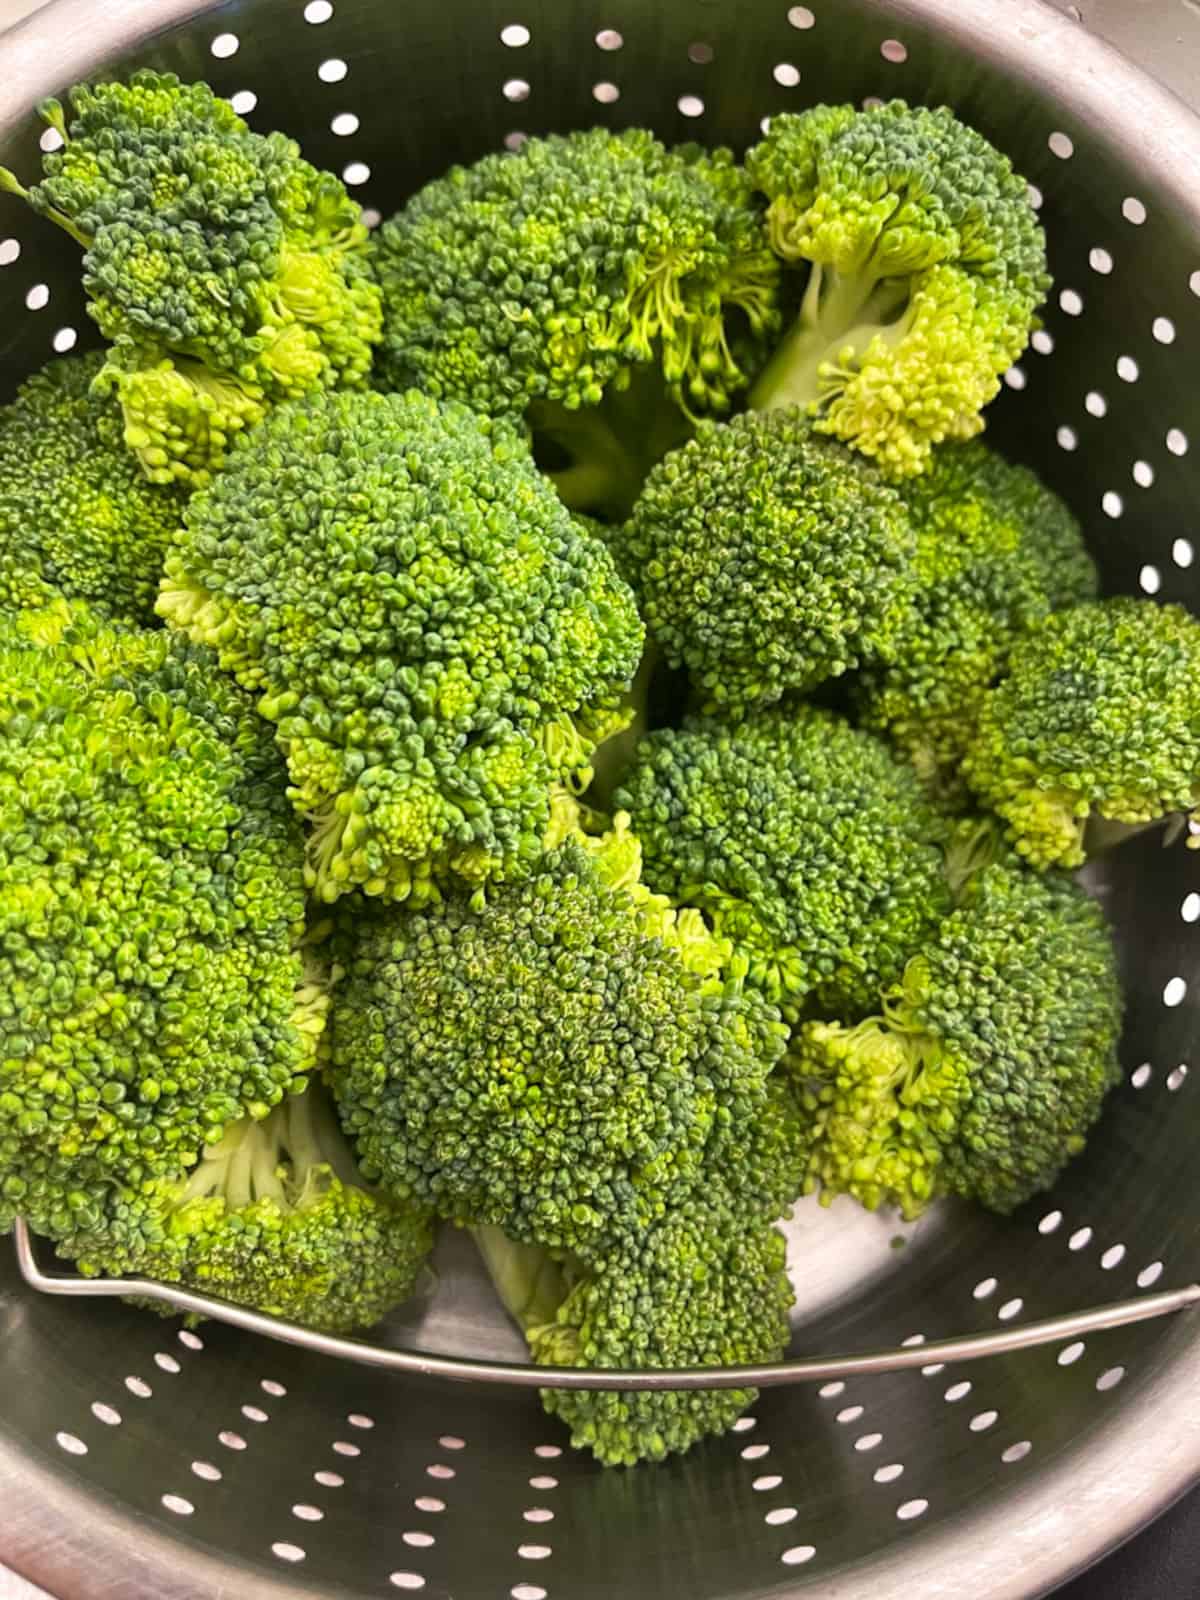 raw broccoli florets in a metal steamer basket with holes and a metal handle